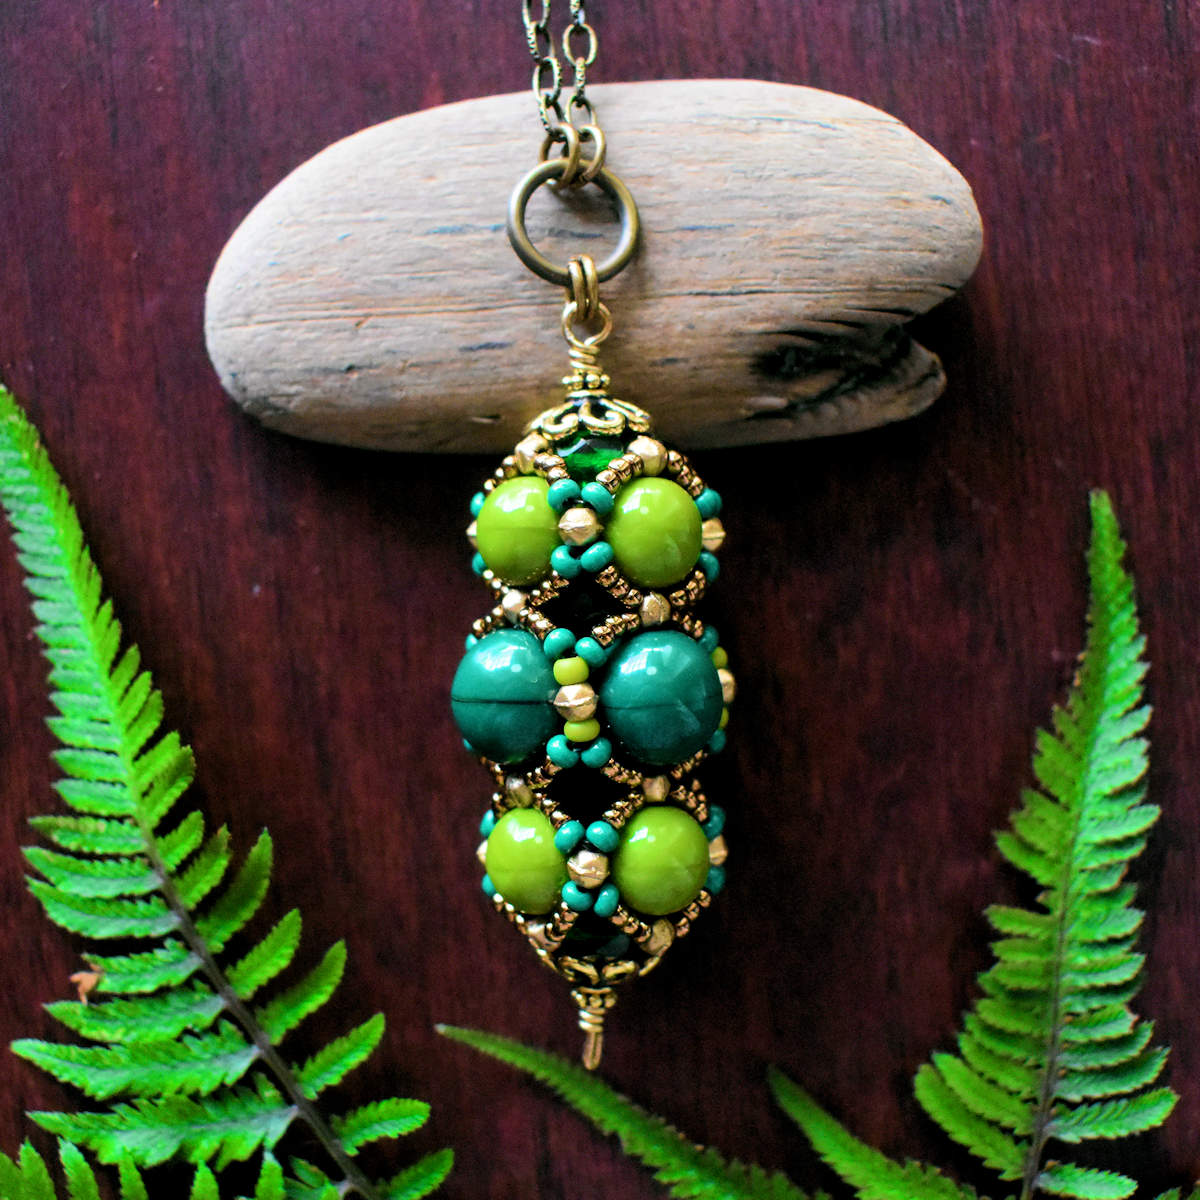 A green columnar pendant with three rows of round green beads outlined in gold seed beads lays against a small piece of driftwood on a red wood background. There are green ferns laying around the pendant.